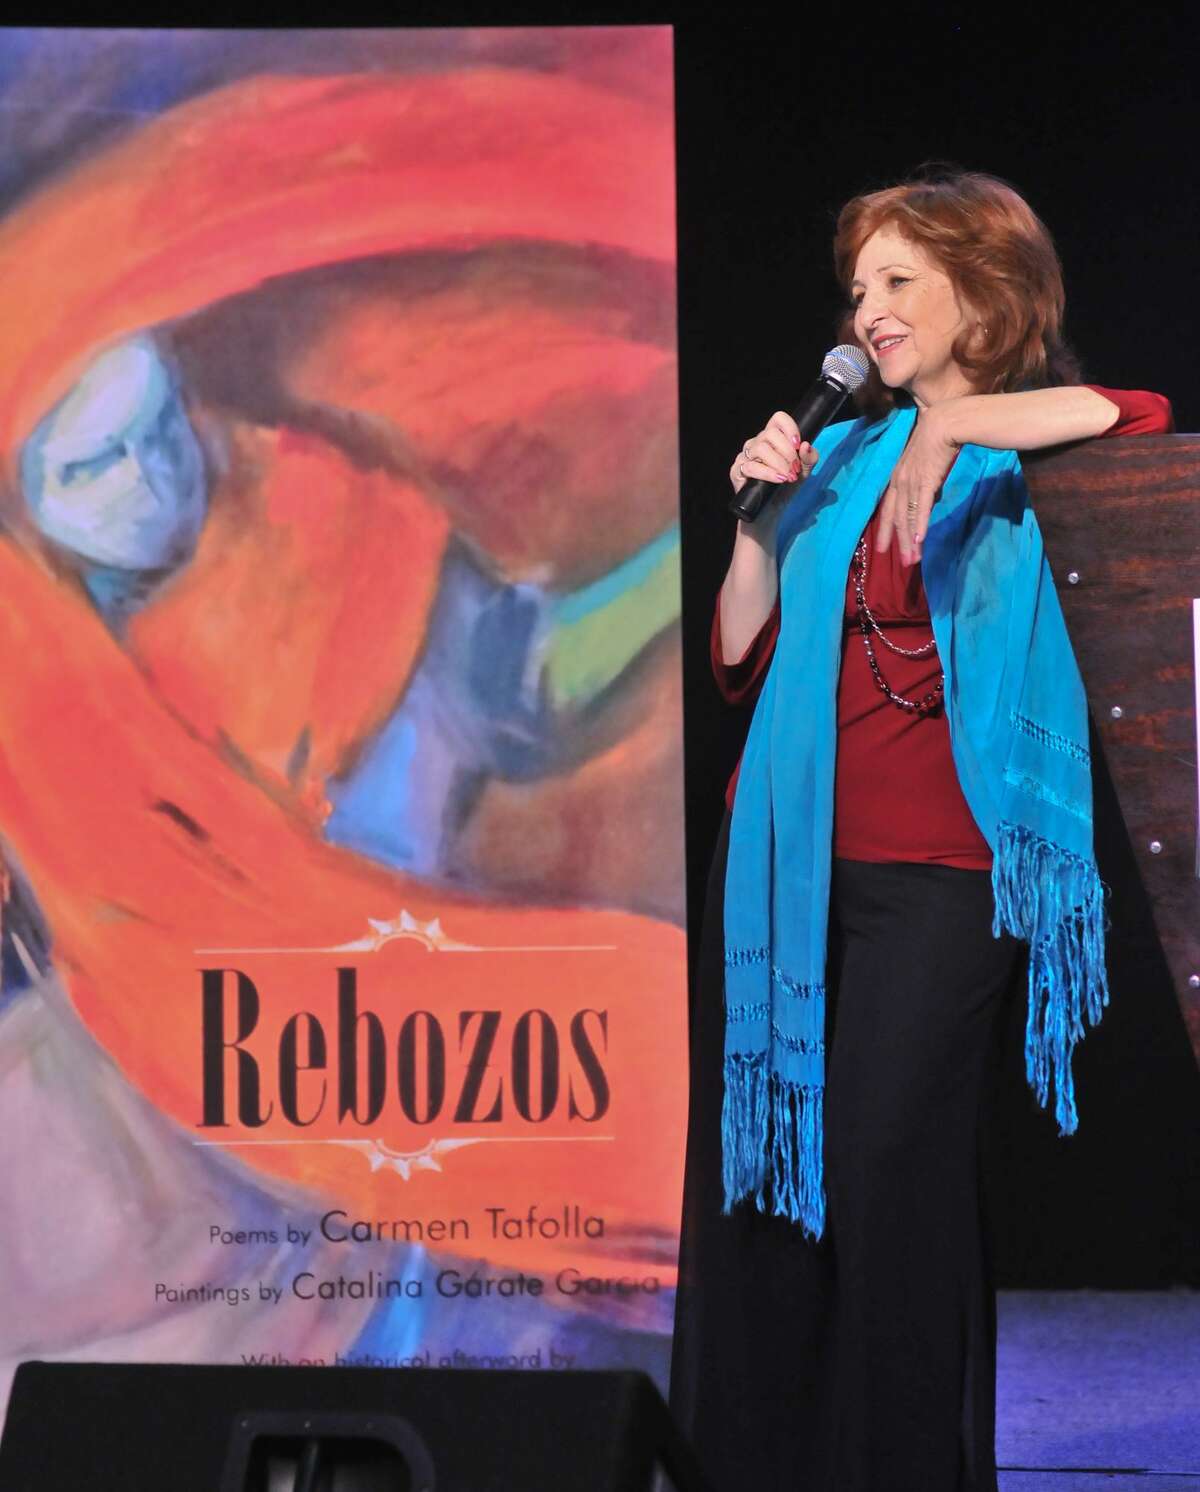 San Antonio author and poet Laureate Carmen Tafolla spoke in front of an enlargement of her book “Rebozos” during a children’s book event.